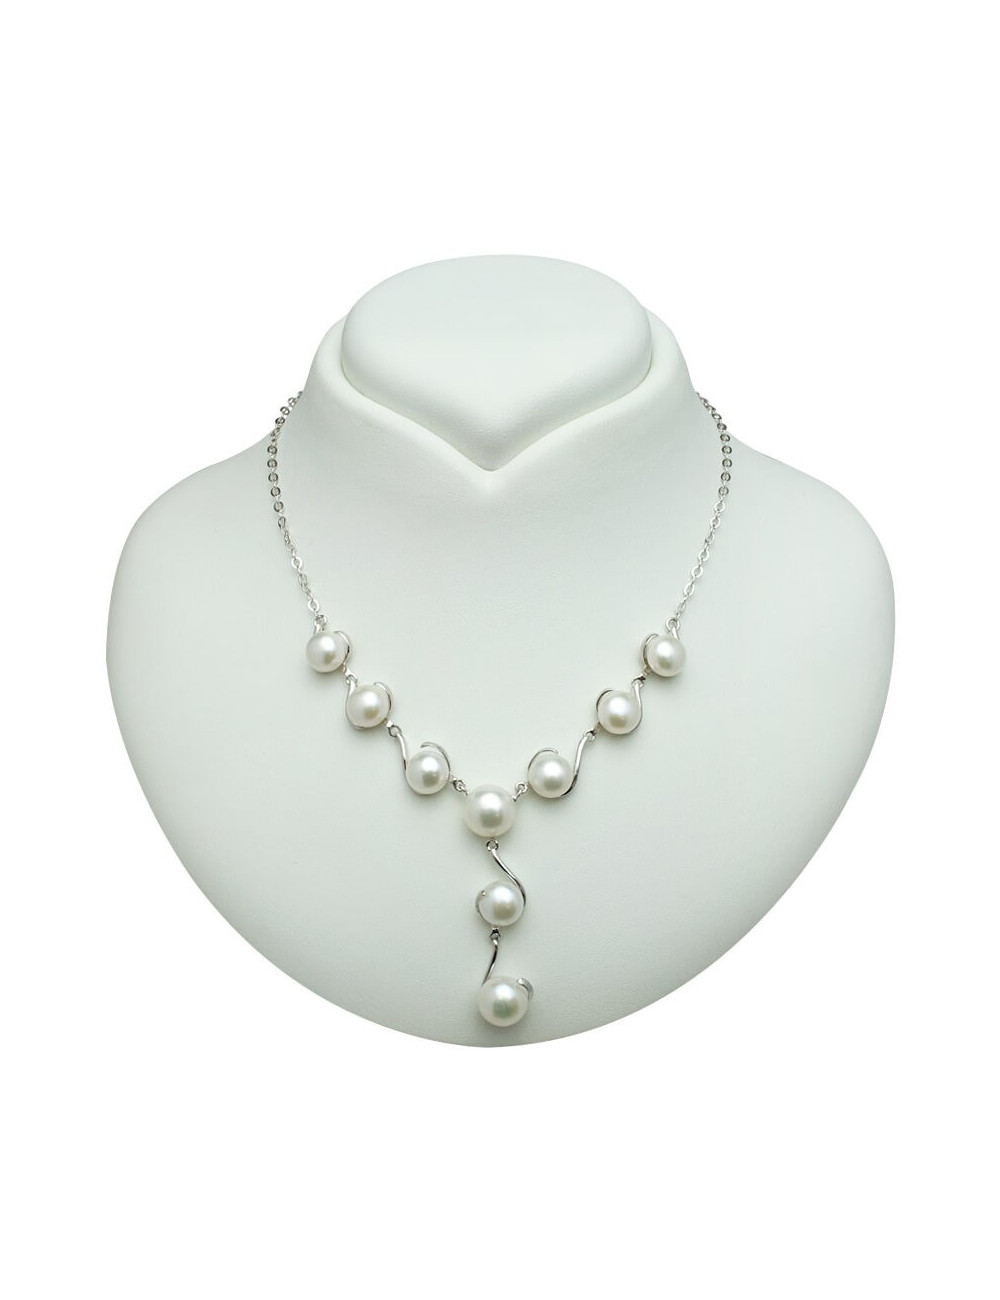 Silver chain- necklace with 9 white pearls with high shine IHL07AS